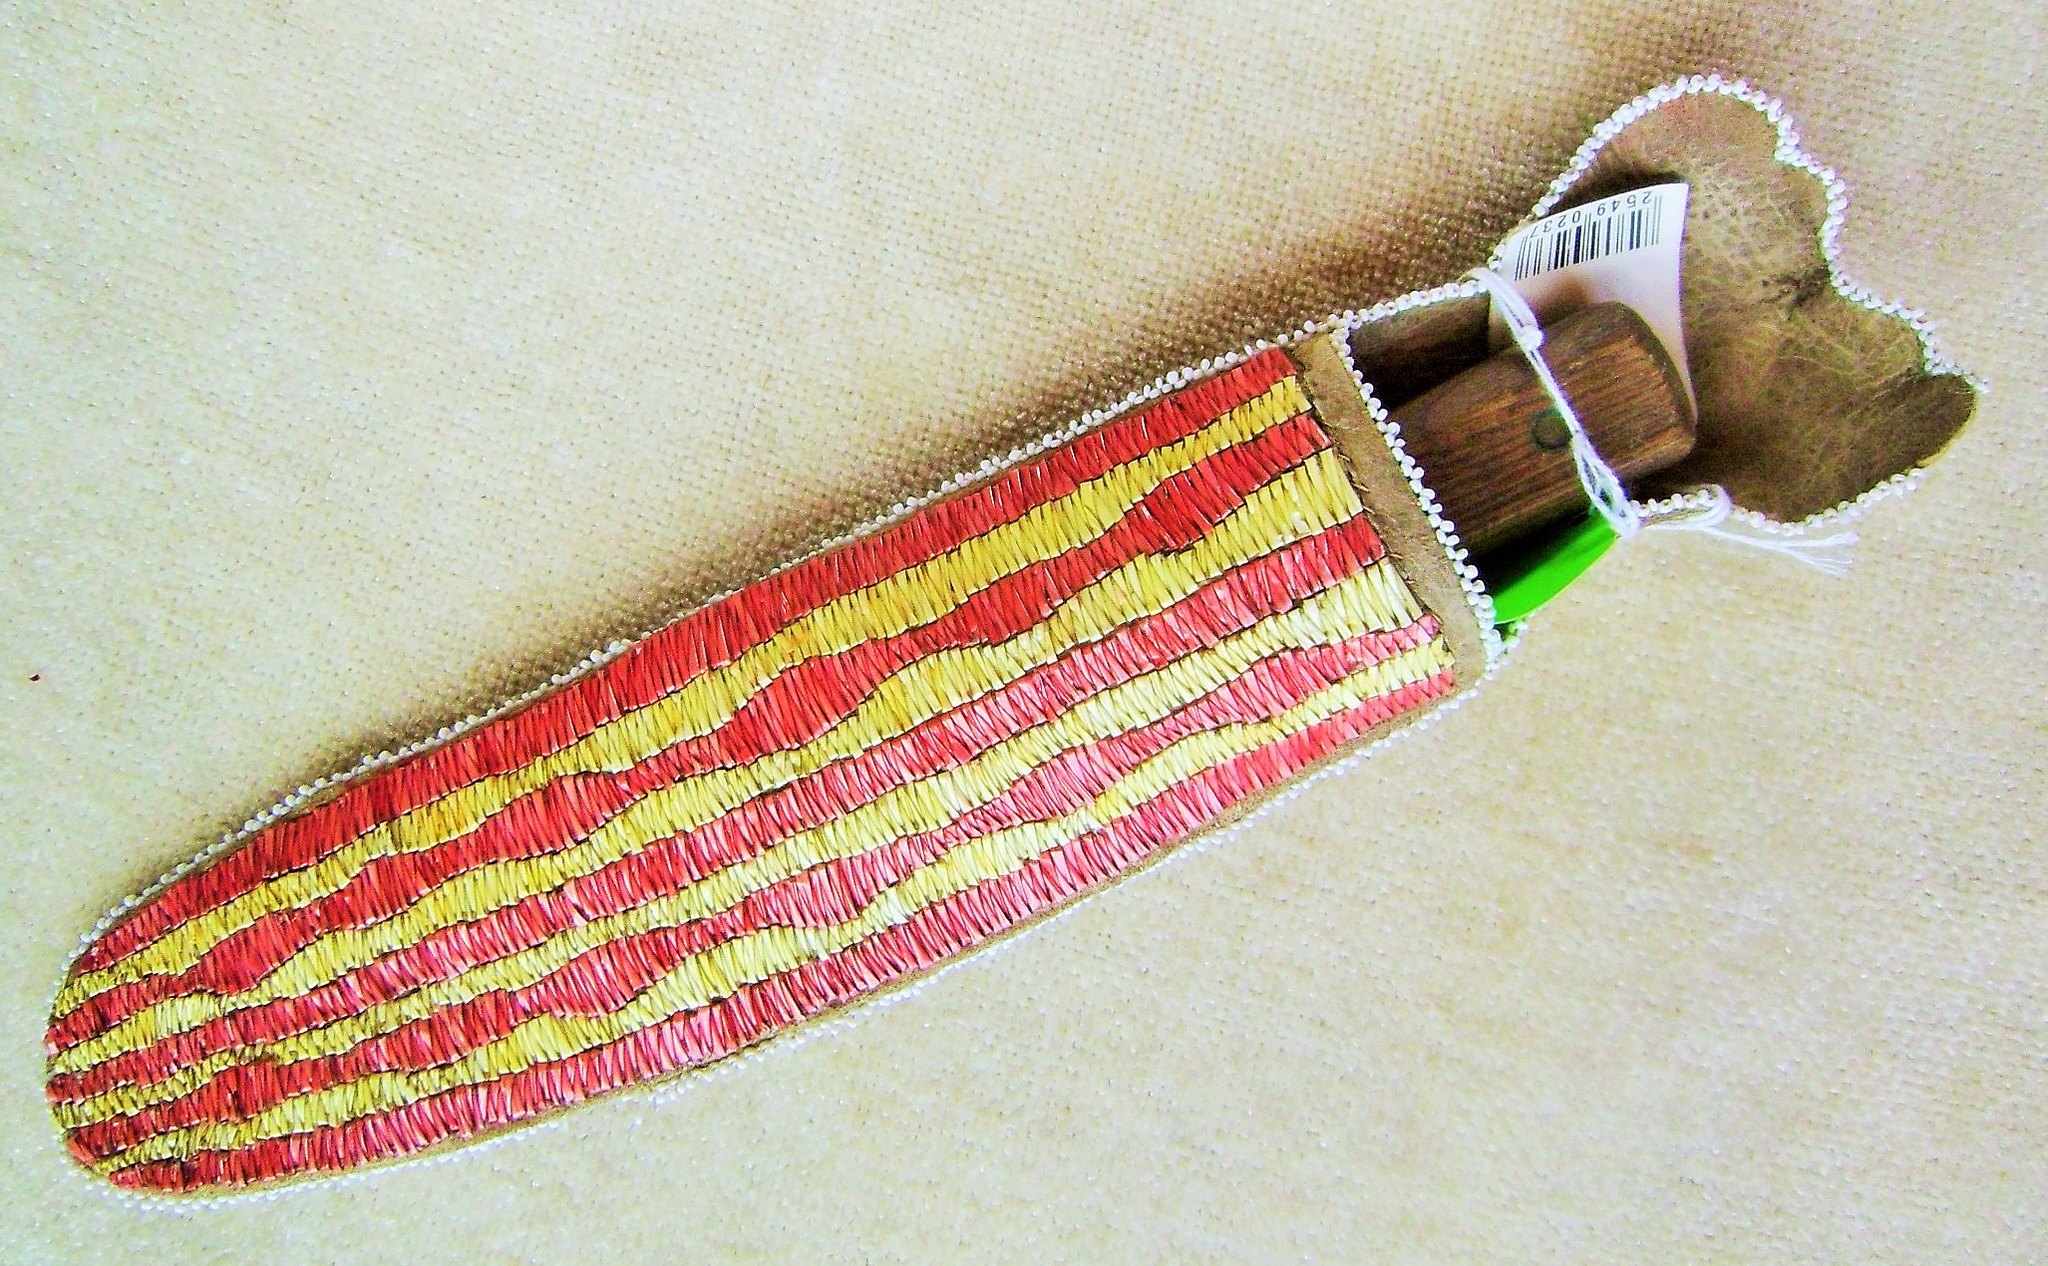 003 Quilled knife sheath yellow and red quilled knife sheath trimmed with white beads 12" x 3"